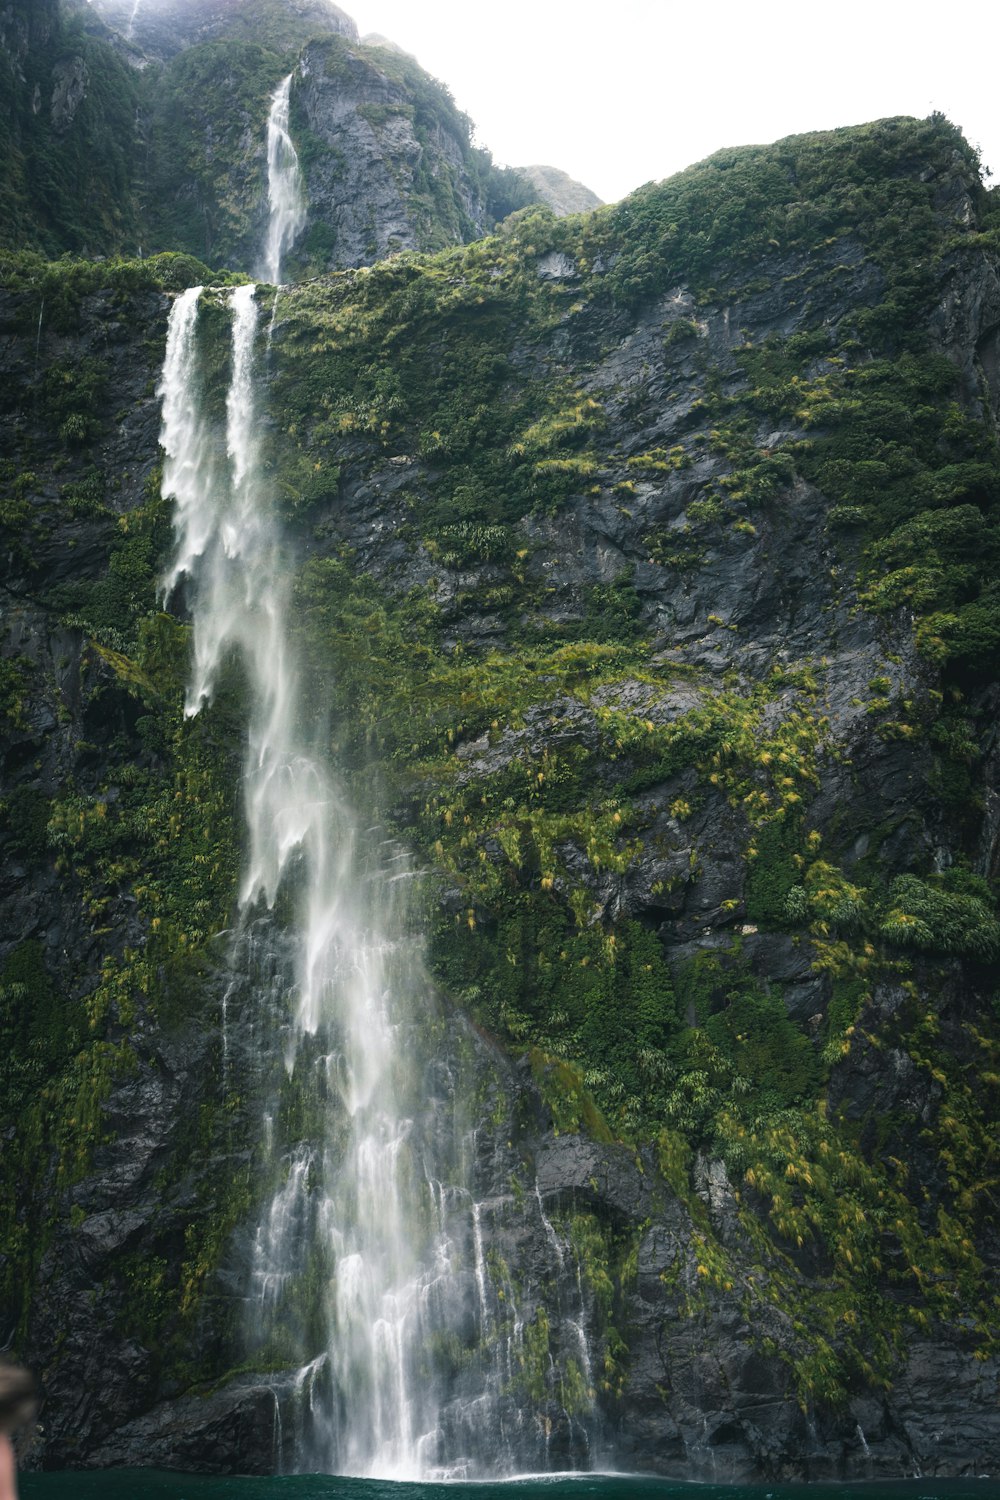 water falls by the mountain